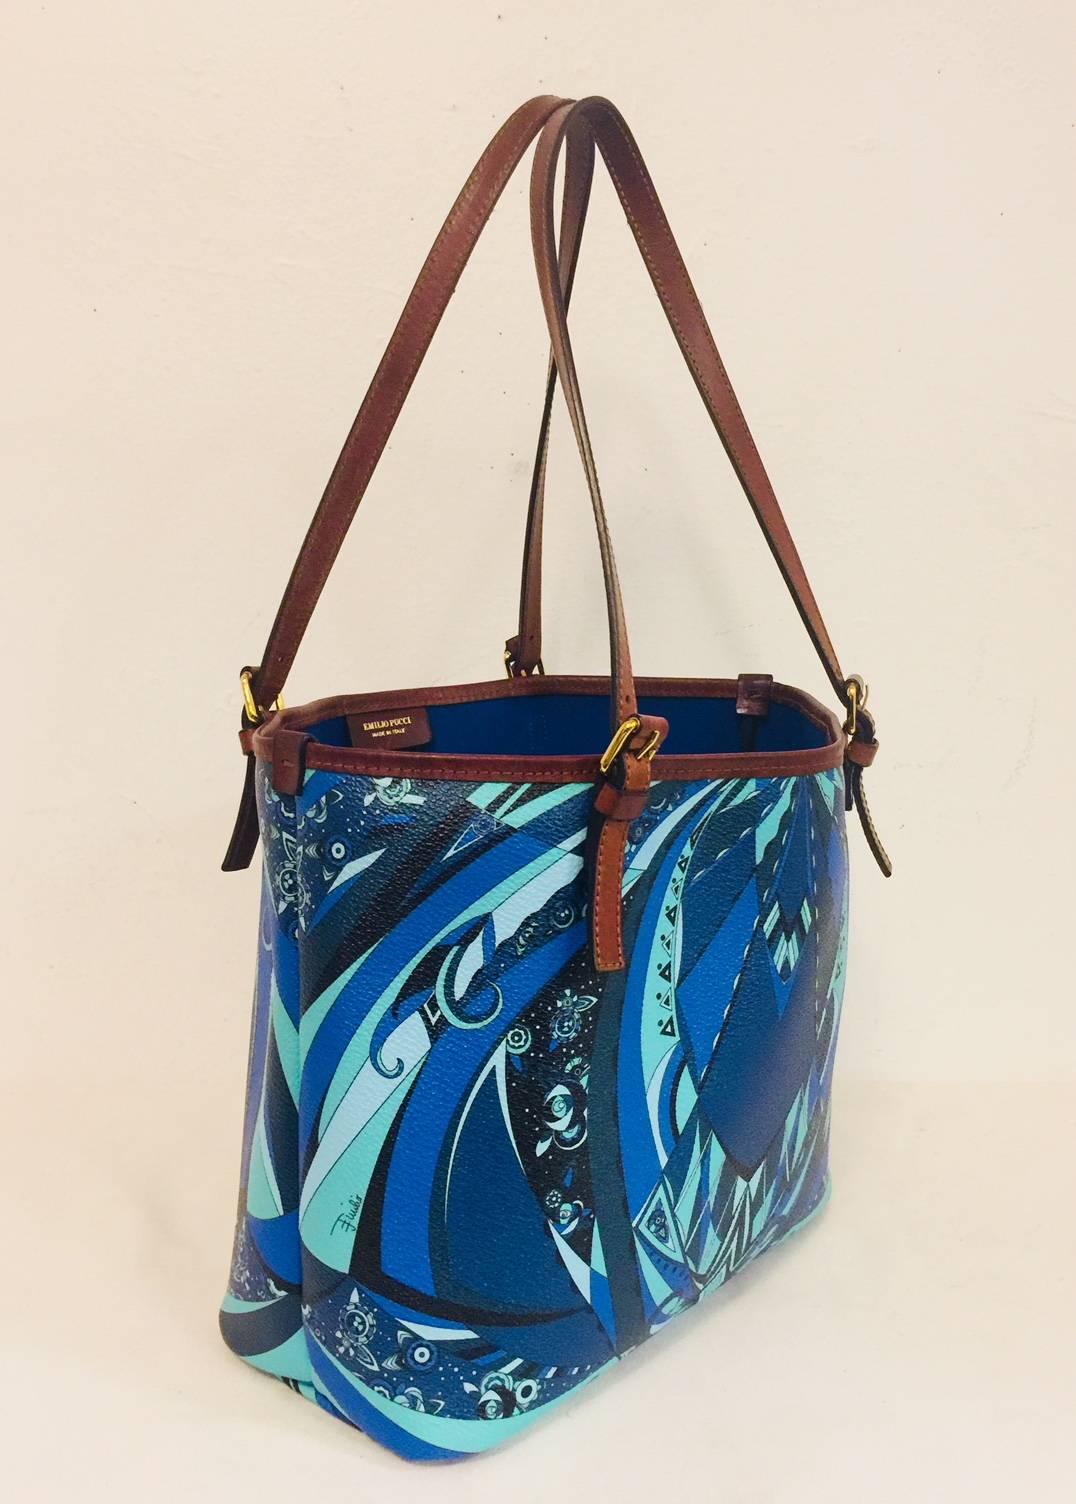 Renowned for eclectic, colorful, exuberant prints, Emilio Pucci designs have become required for all women of style!  This Rio Piazzo Tote features coated canvas body with signature, abstract blue and green print, dual, adjustable straps in cognac. 